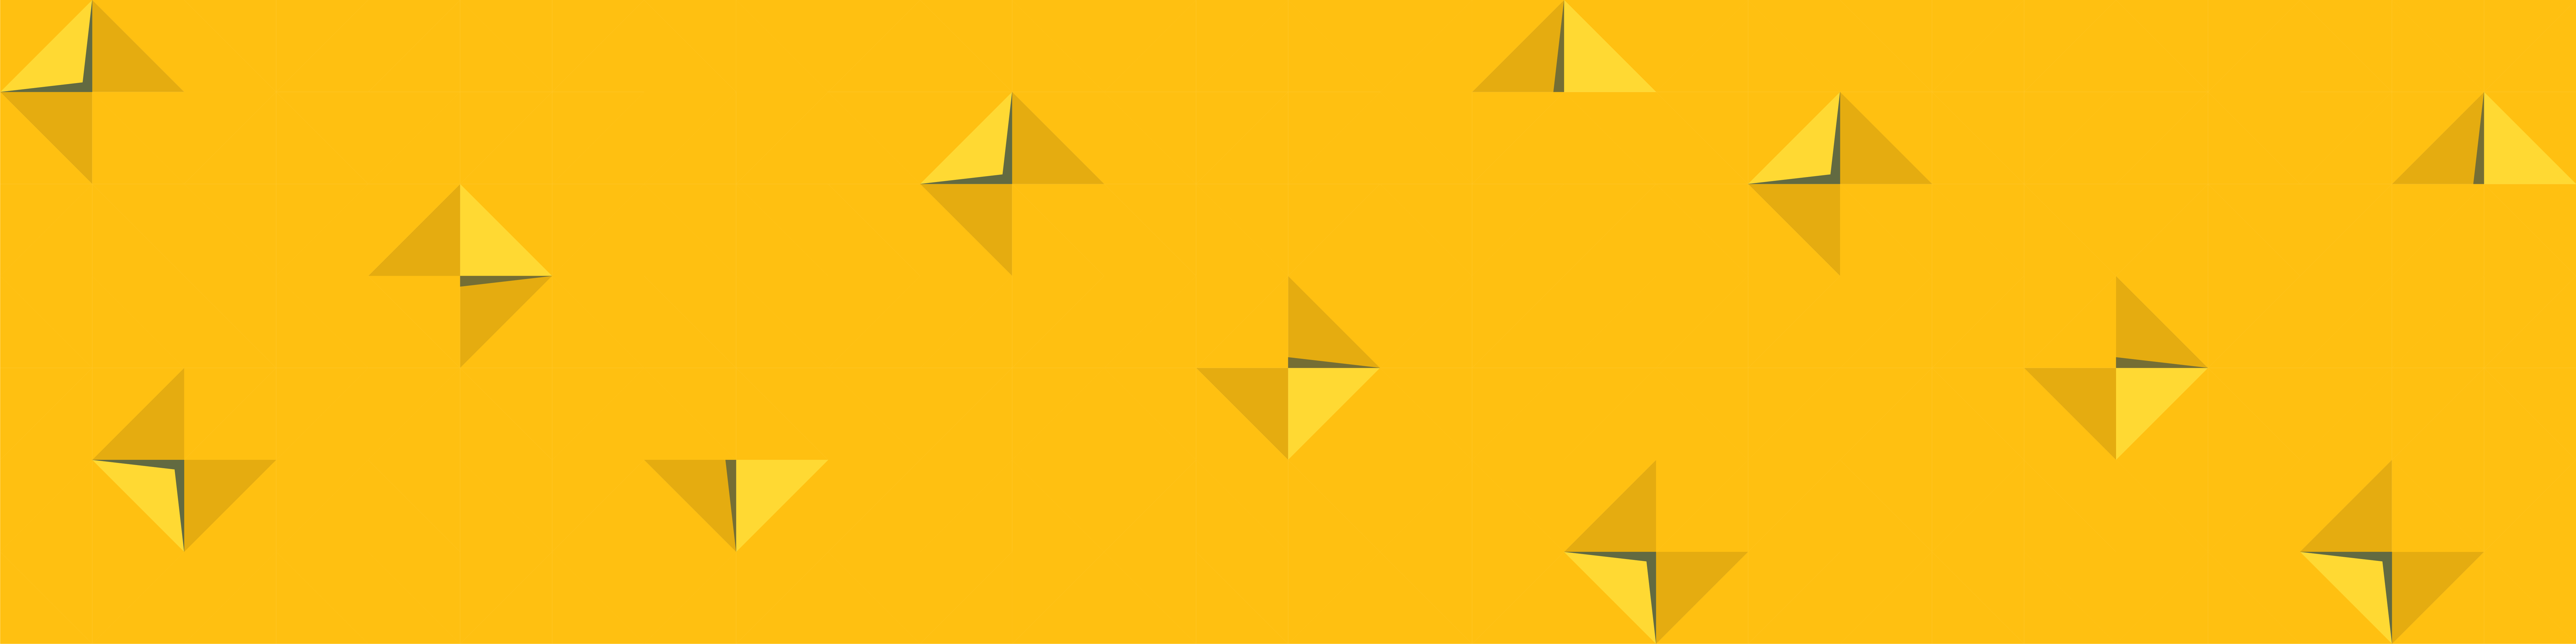 menzies accountants Featured Image Origami Yellow Little